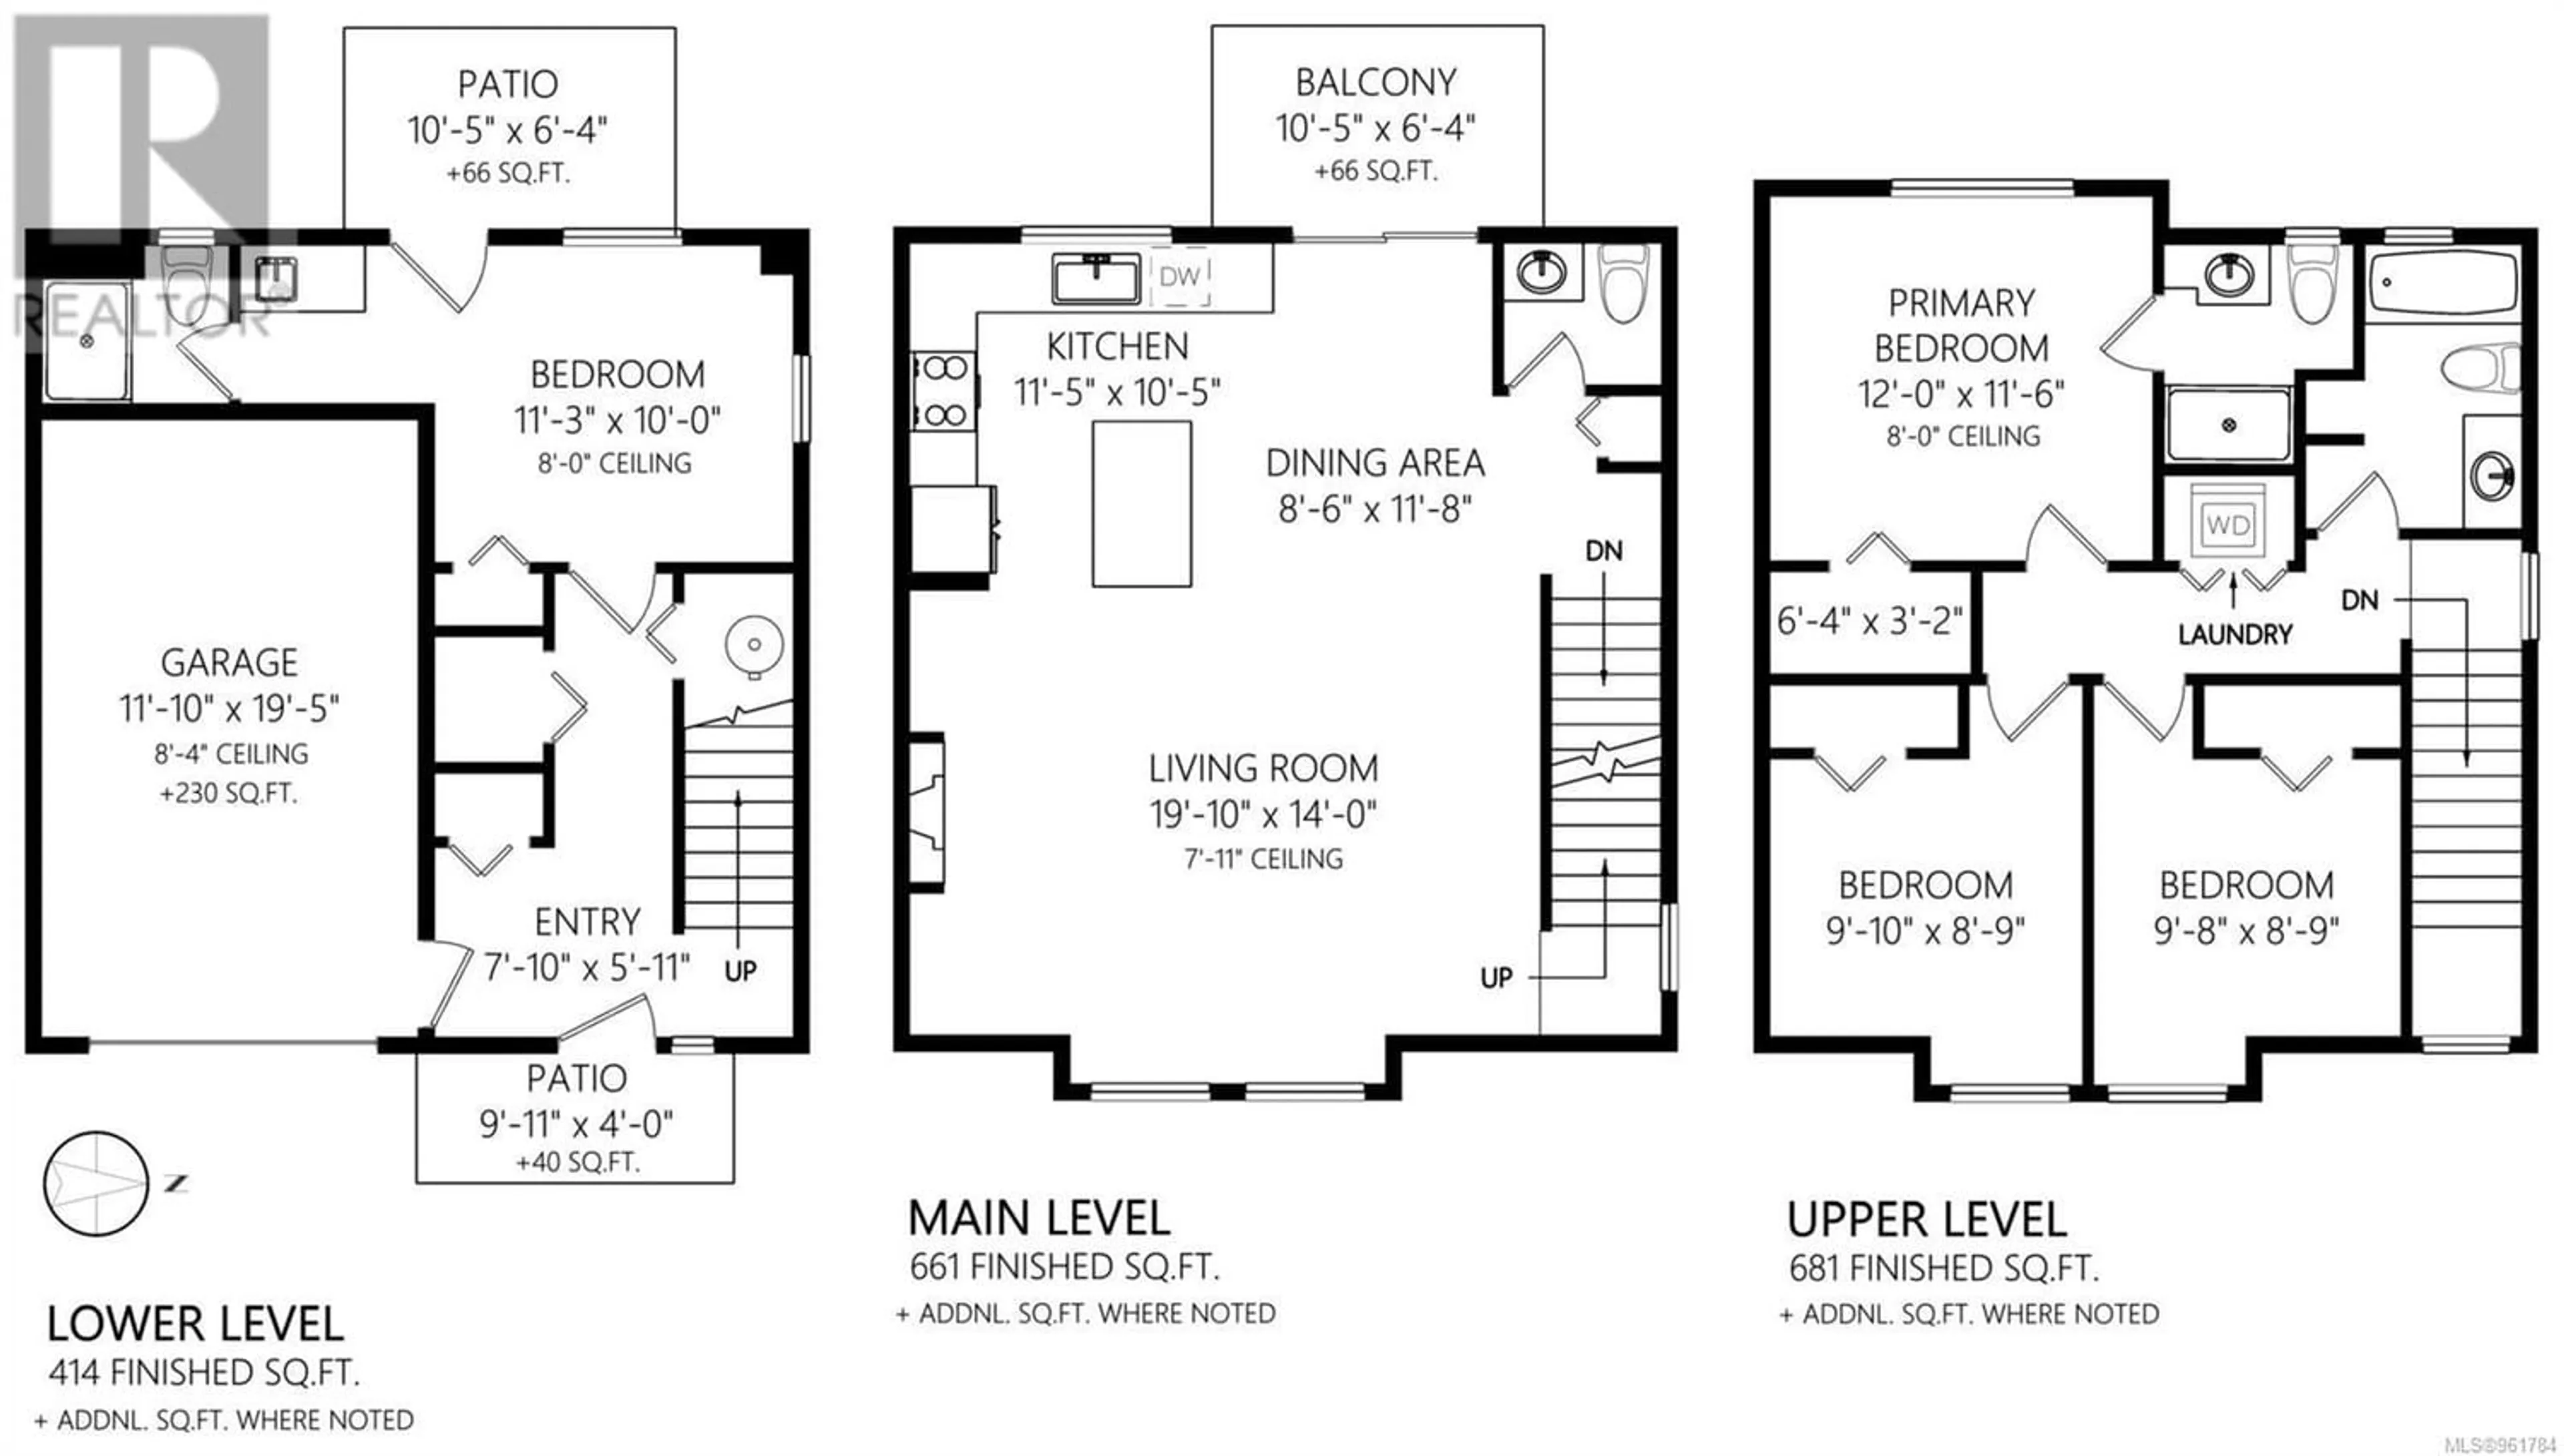 Floor plan for 481 Stirling Ave, Nanaimo British Columbia V9R5N5